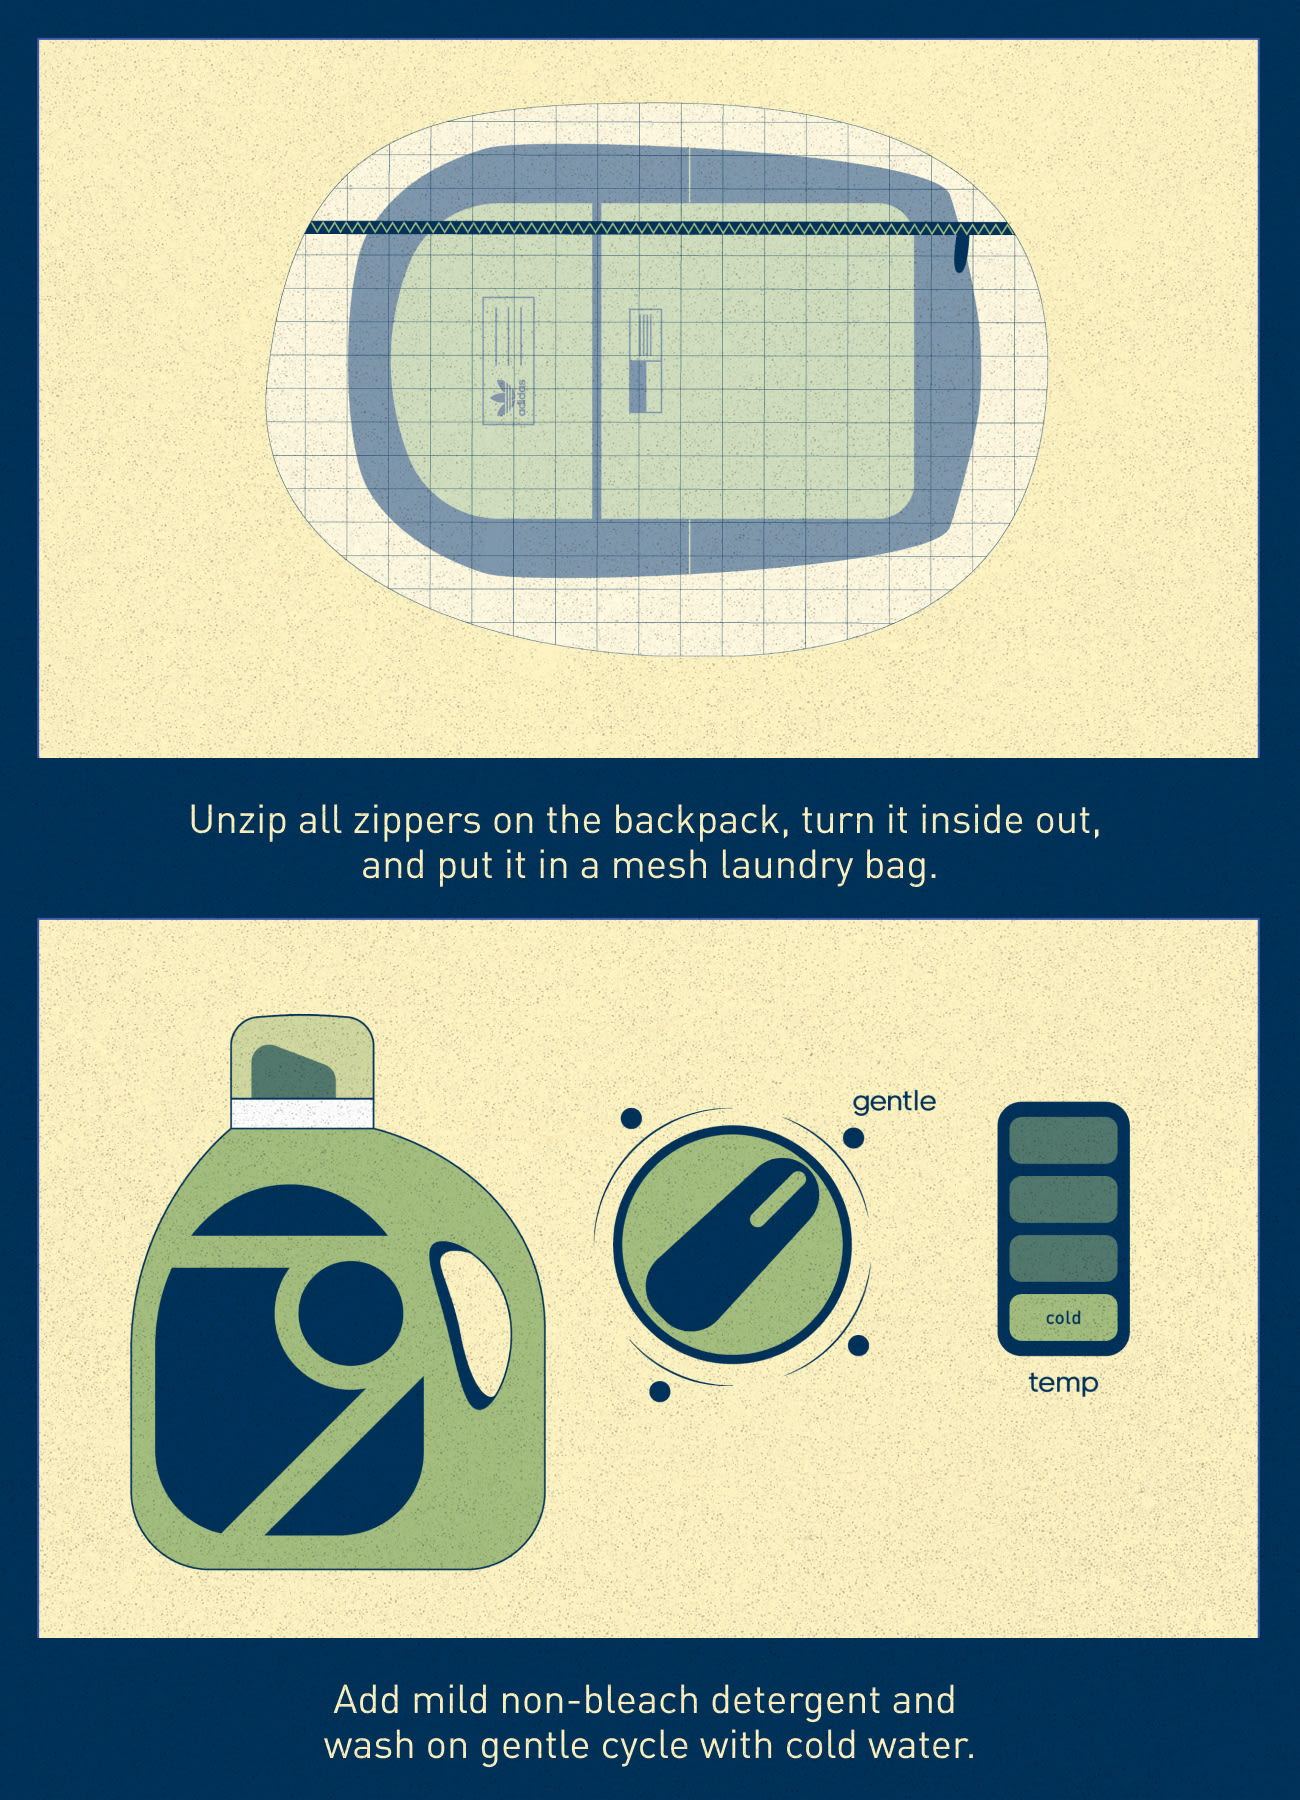 How to Clean Your Backpack by Hand